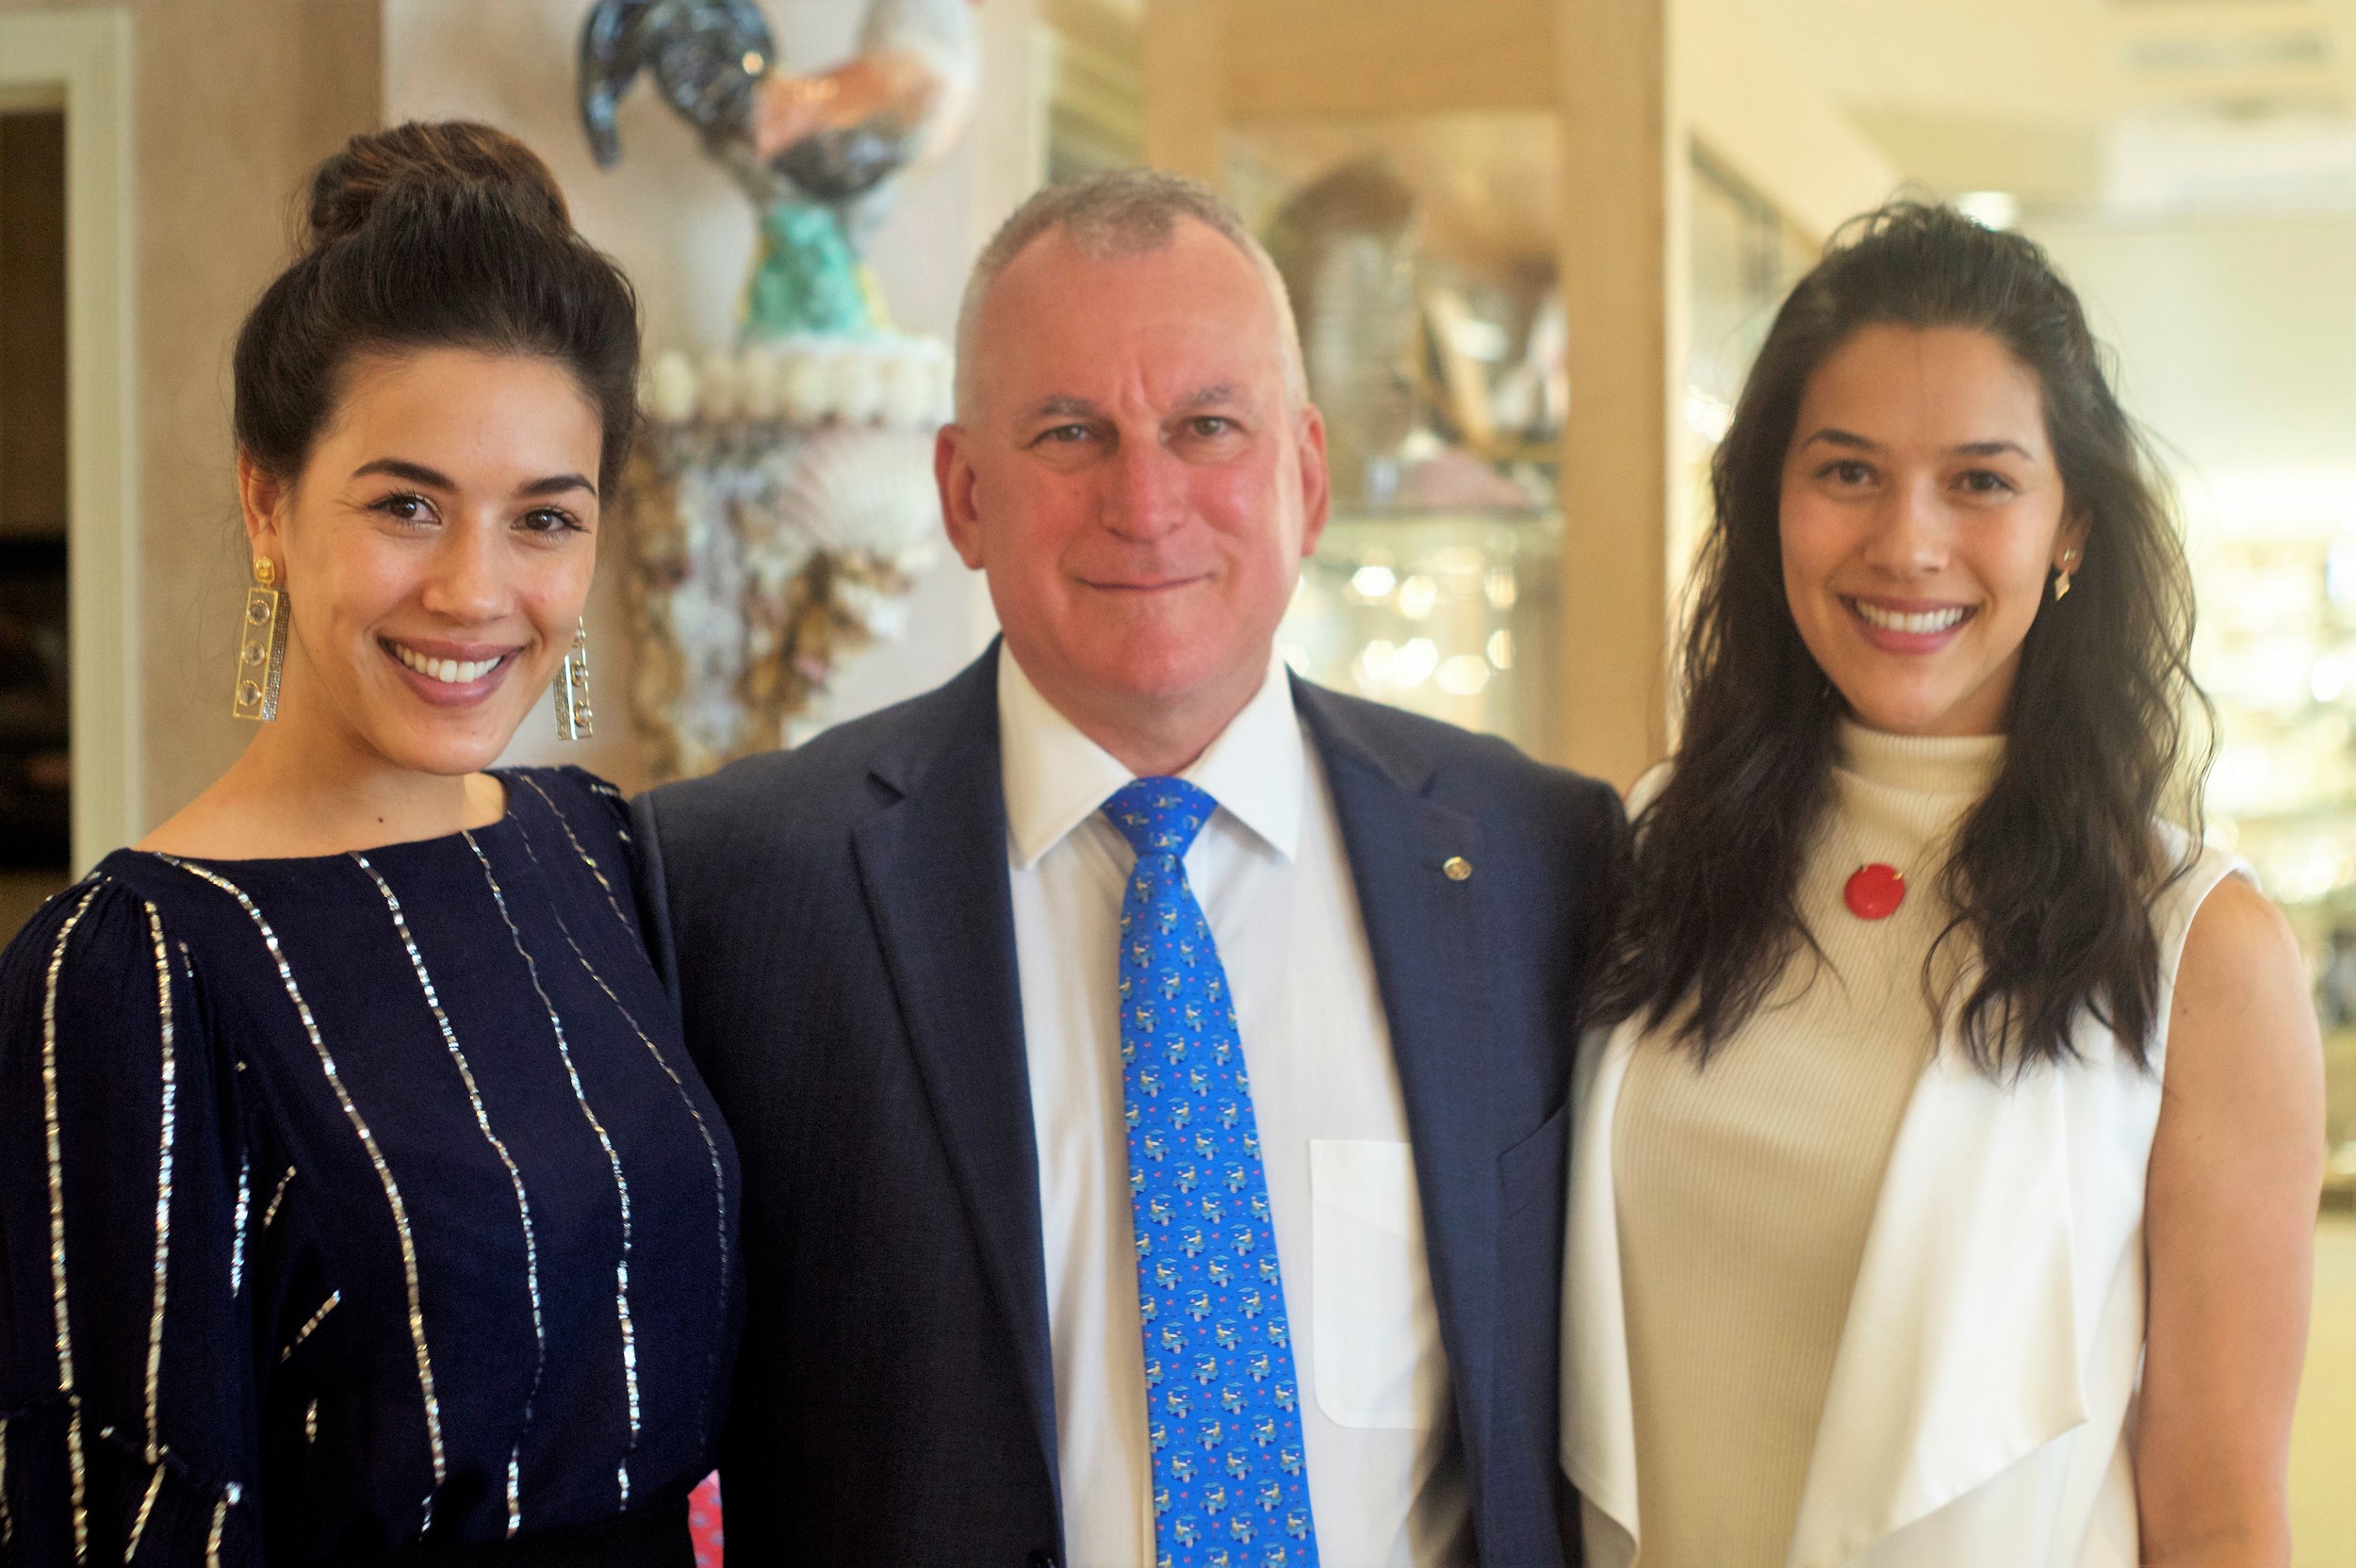 Underwood’s Jewelers' John Rutkowski (center) with Dao Fournier jewelry founders Kimberly Gibson (left) and Lucy Price at the PGA Tour Wives event.